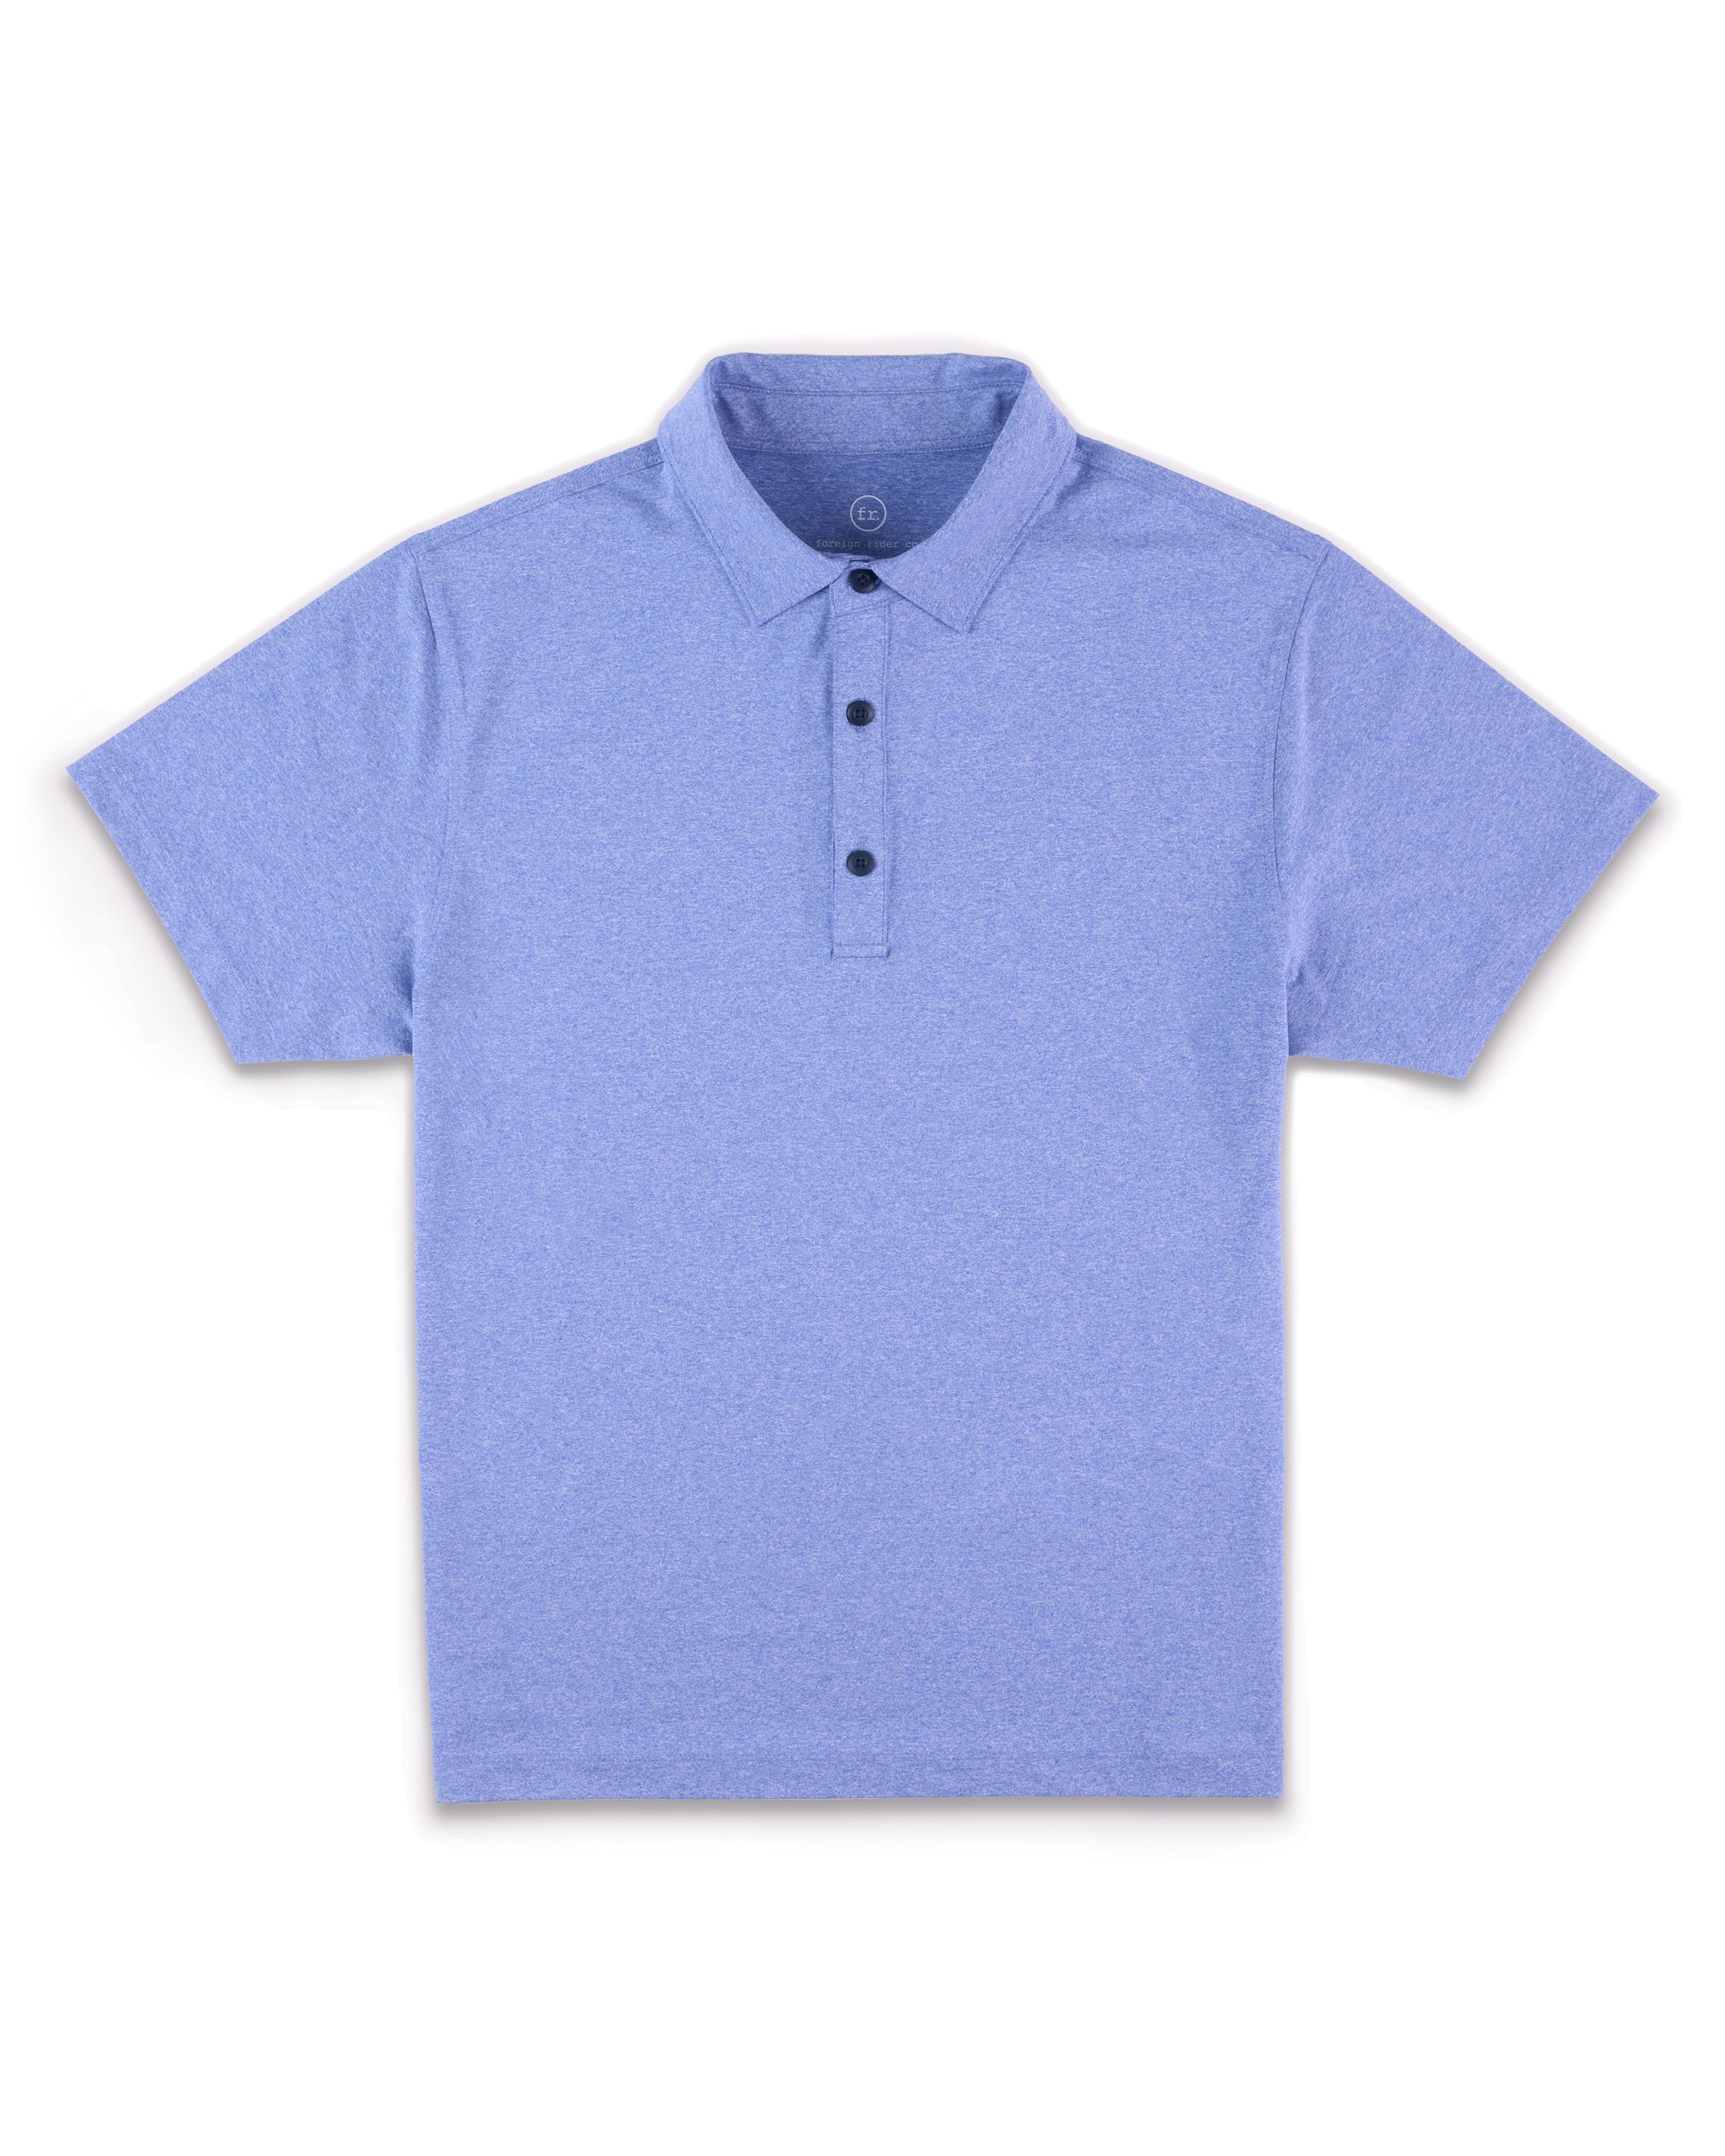 Performance Polo Surf Blue - Foreign Rider Co.